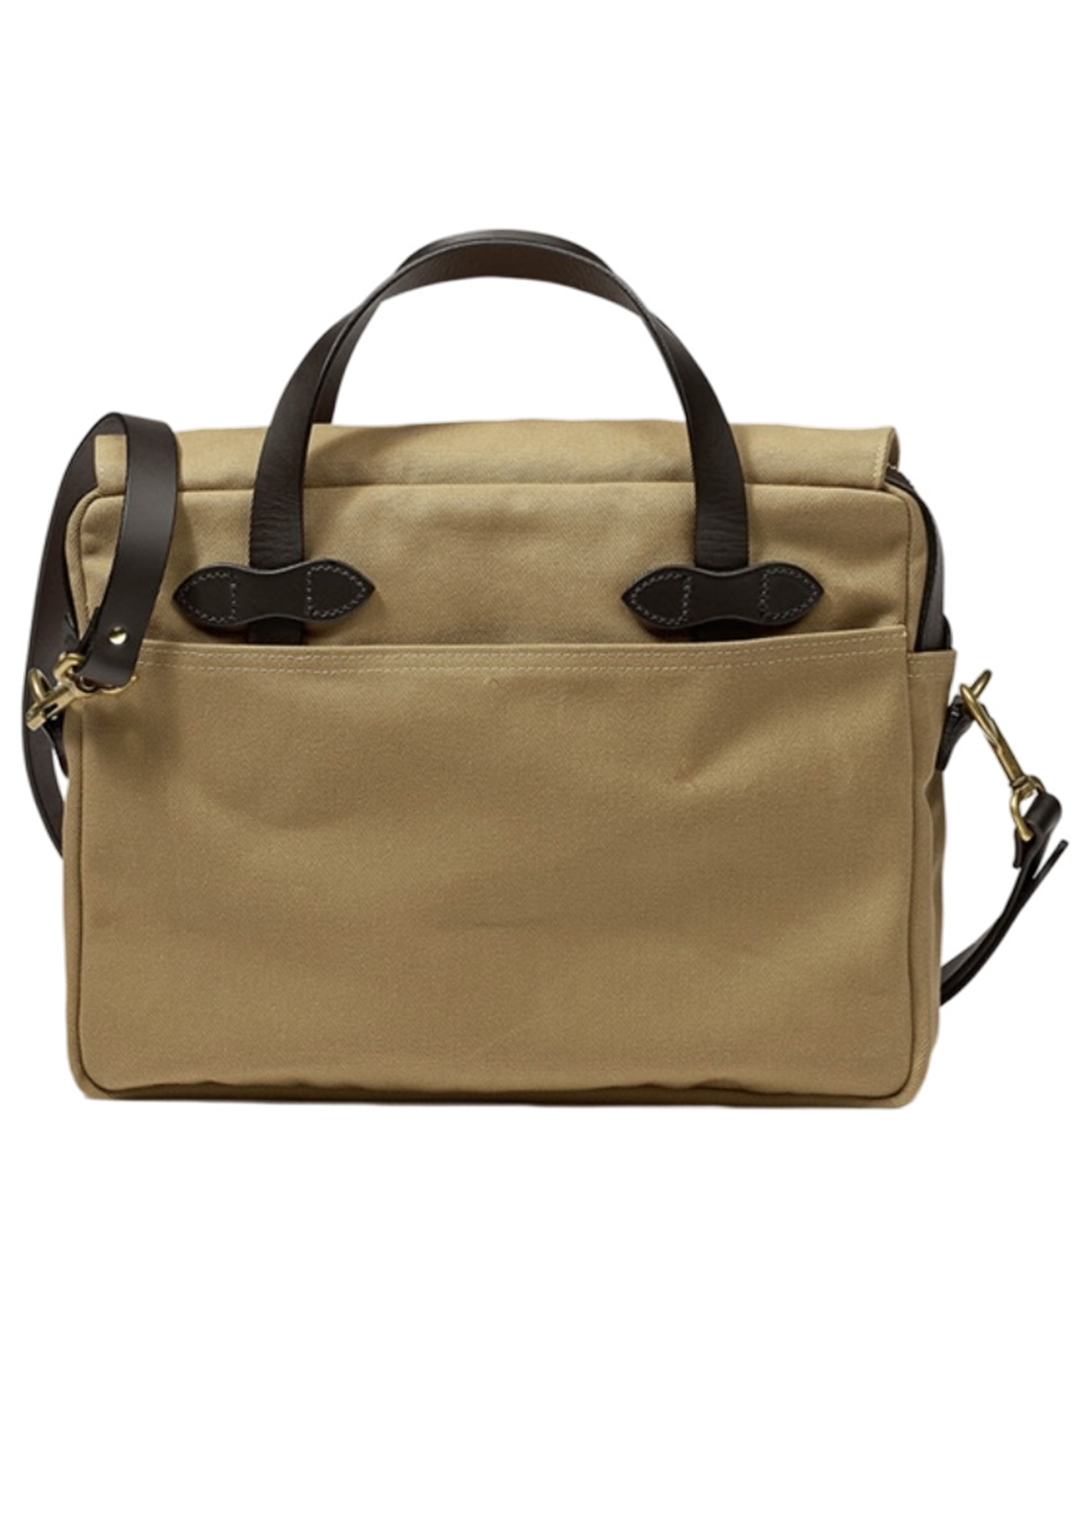 FILSON RUGGED TWILL BRIEFCASE - Cheese Tan and Kakhi – 1924us